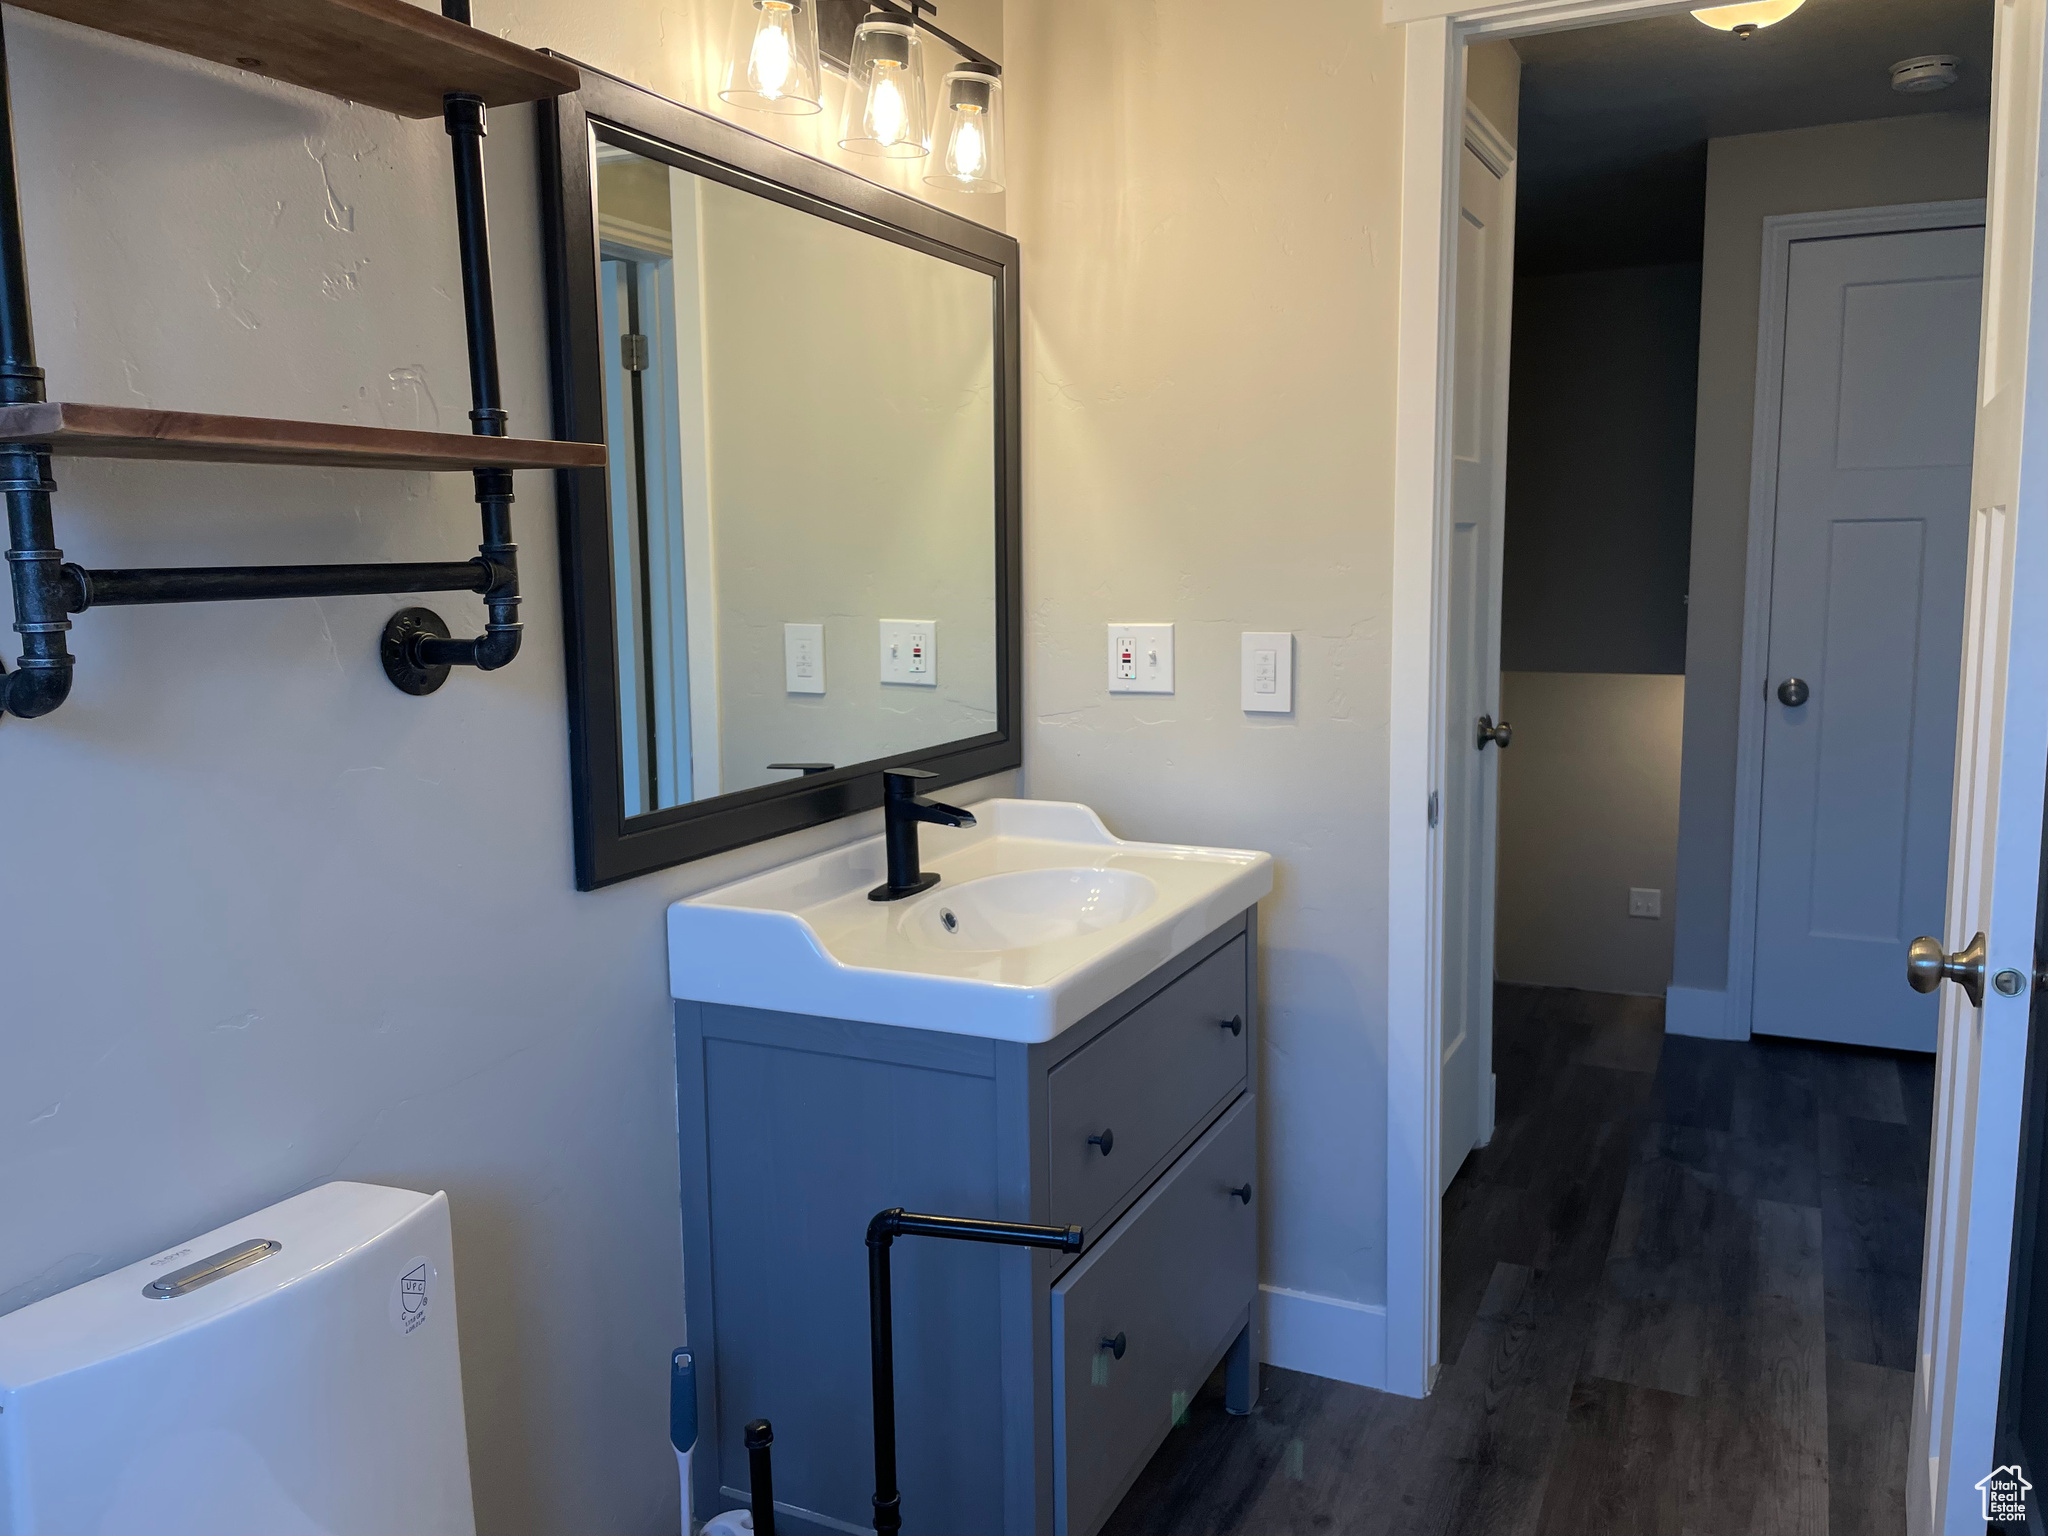 Bathroom featuring toilet, vanity with extensive cabinet space, and hardwood / wood-style floors